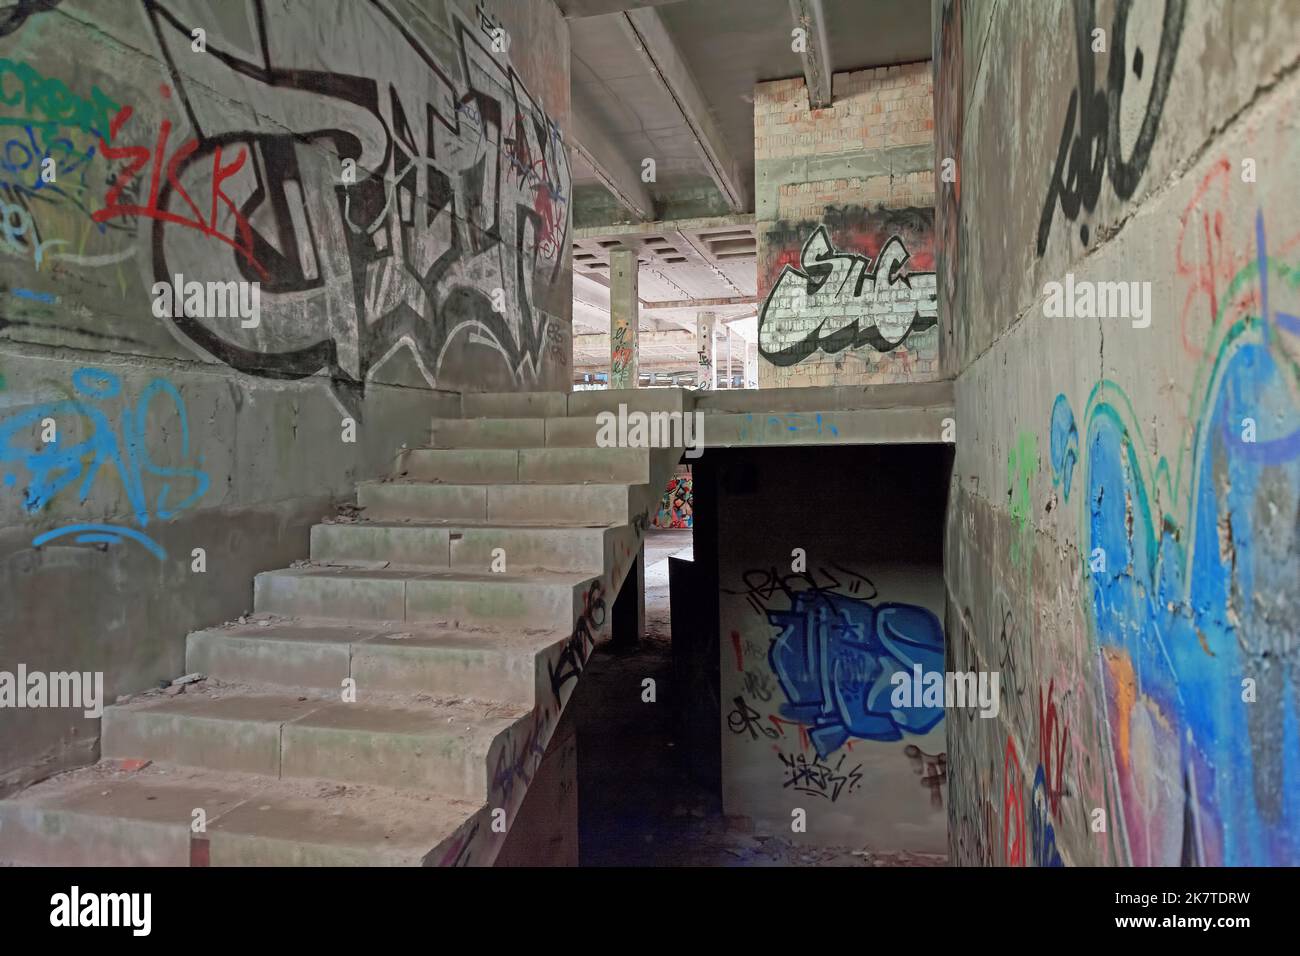 Staircase in abandoned ruin, walls sprayed with graffiti Stock Photo